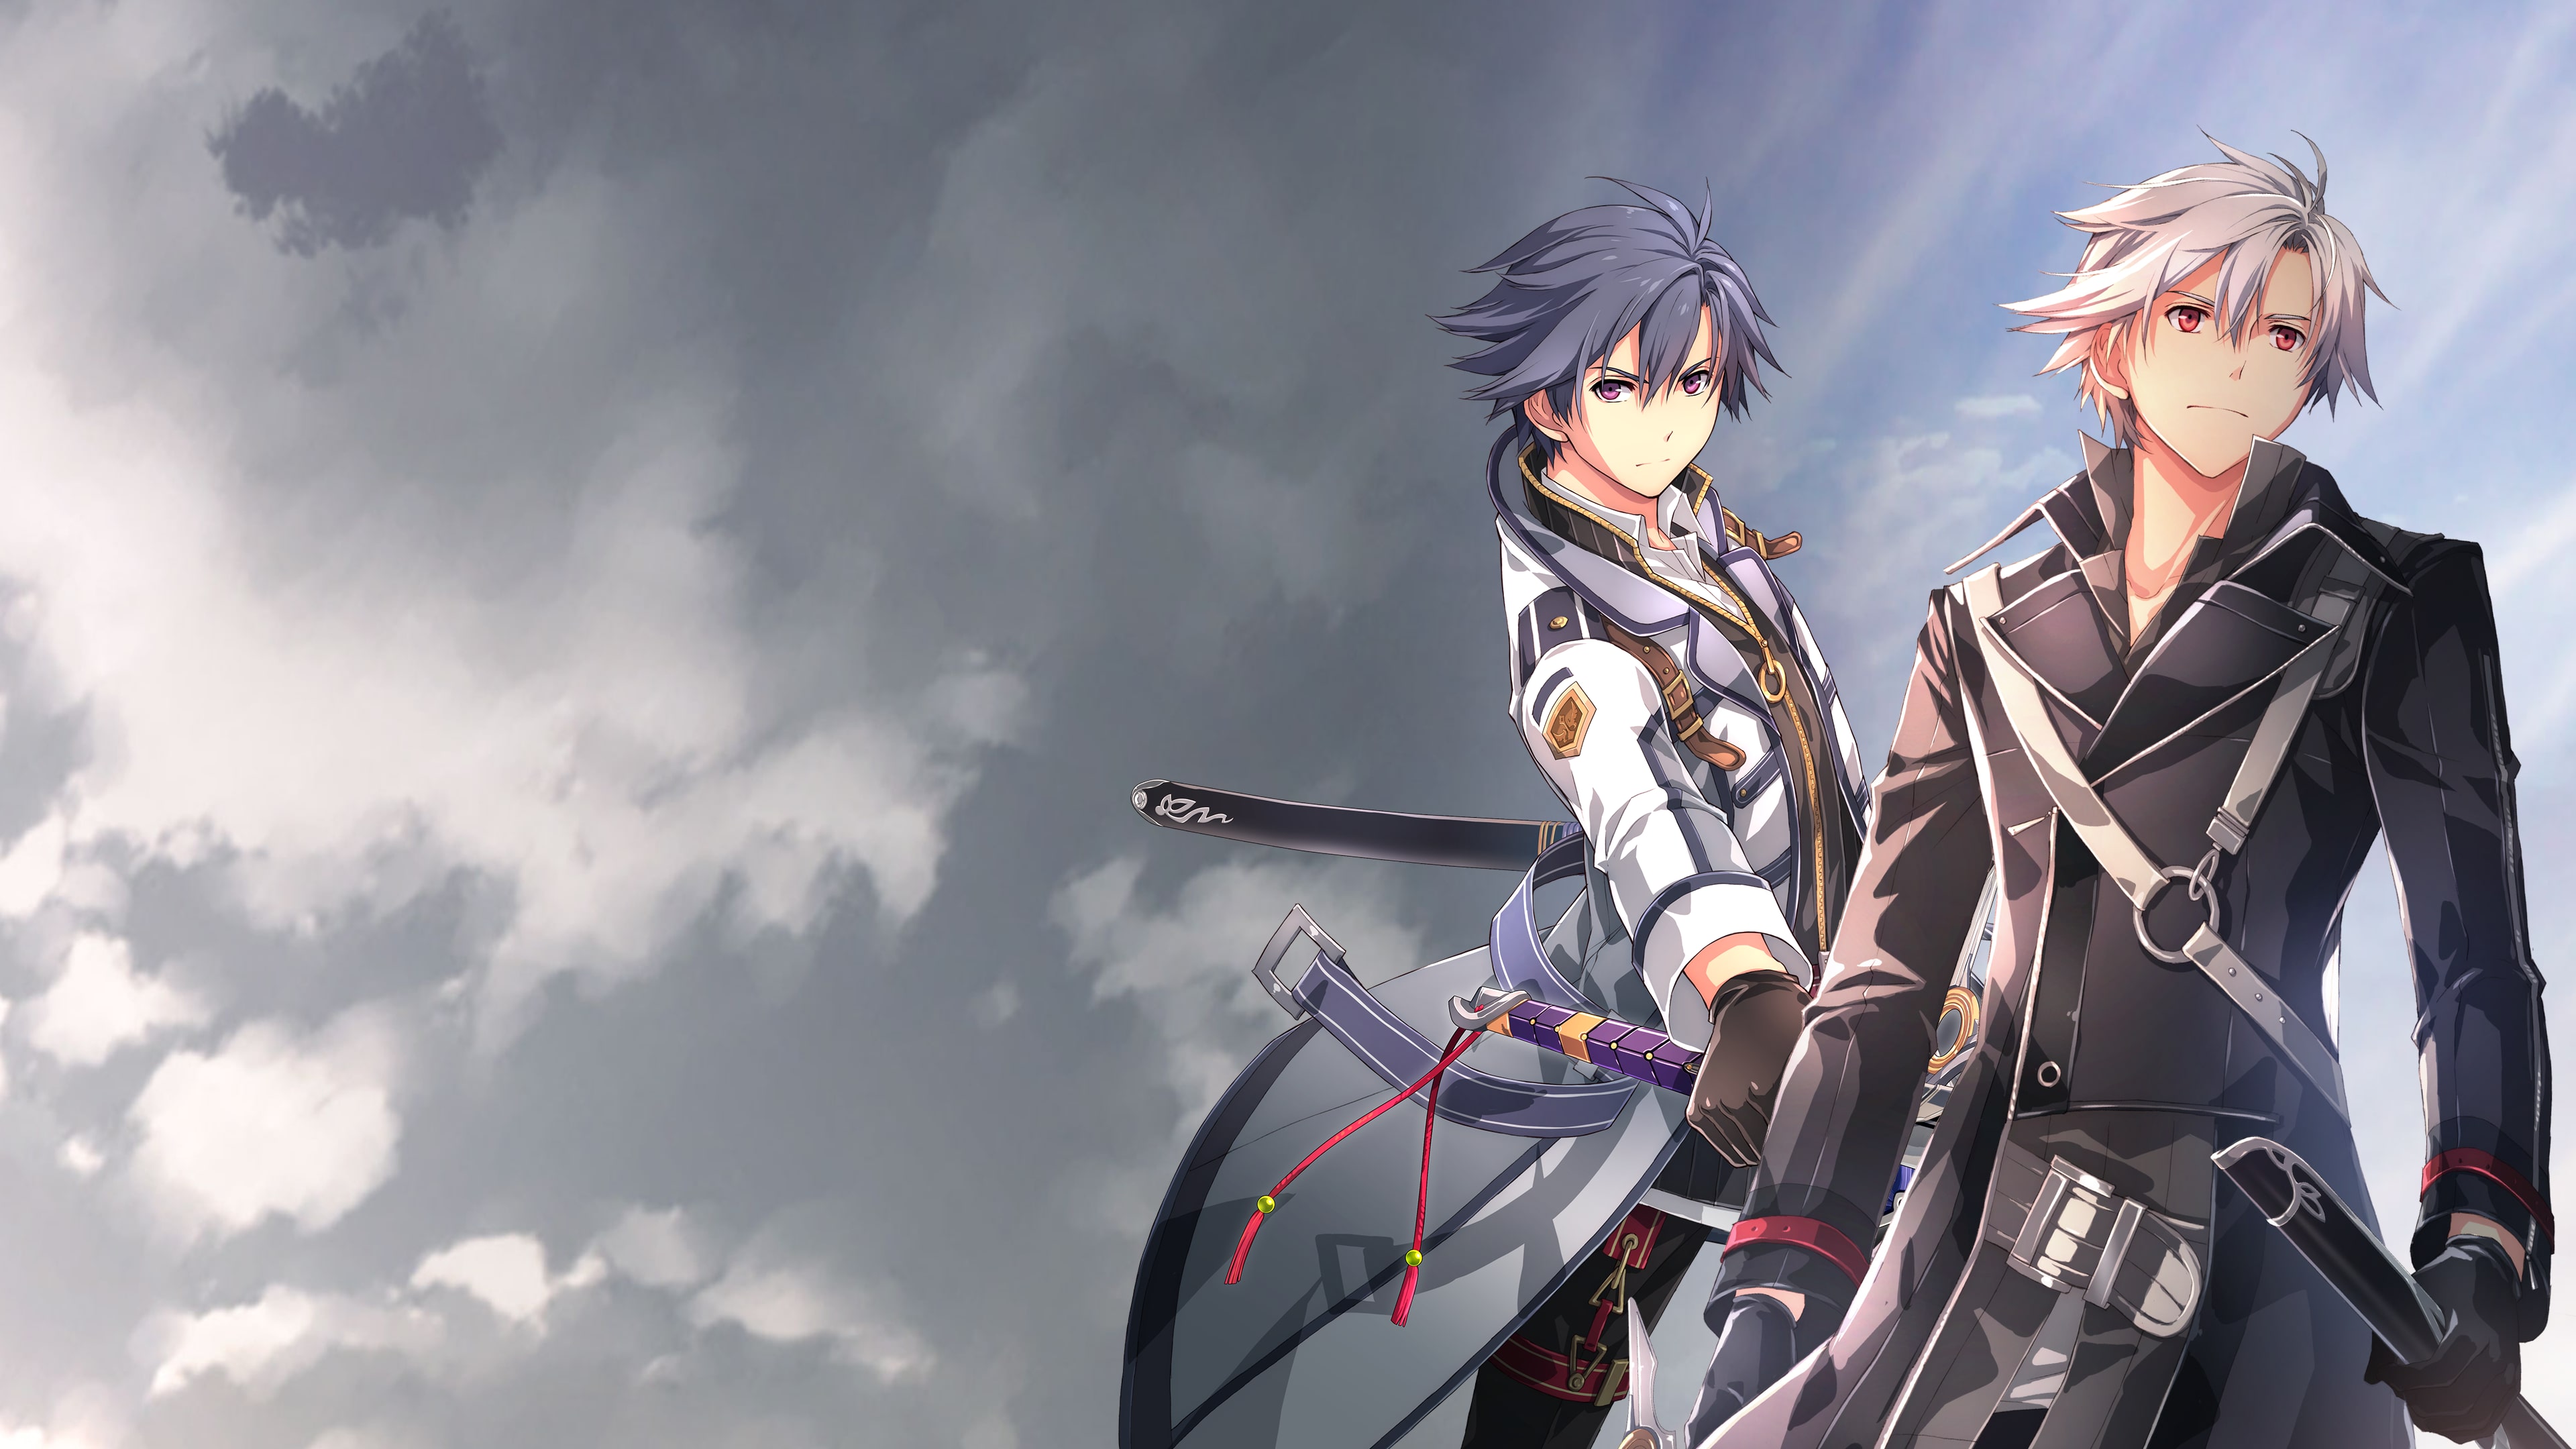 The Legend of Heroes: Trails of Cold Steel III / The Legend of Heroes: Trails of Cold Steel IV